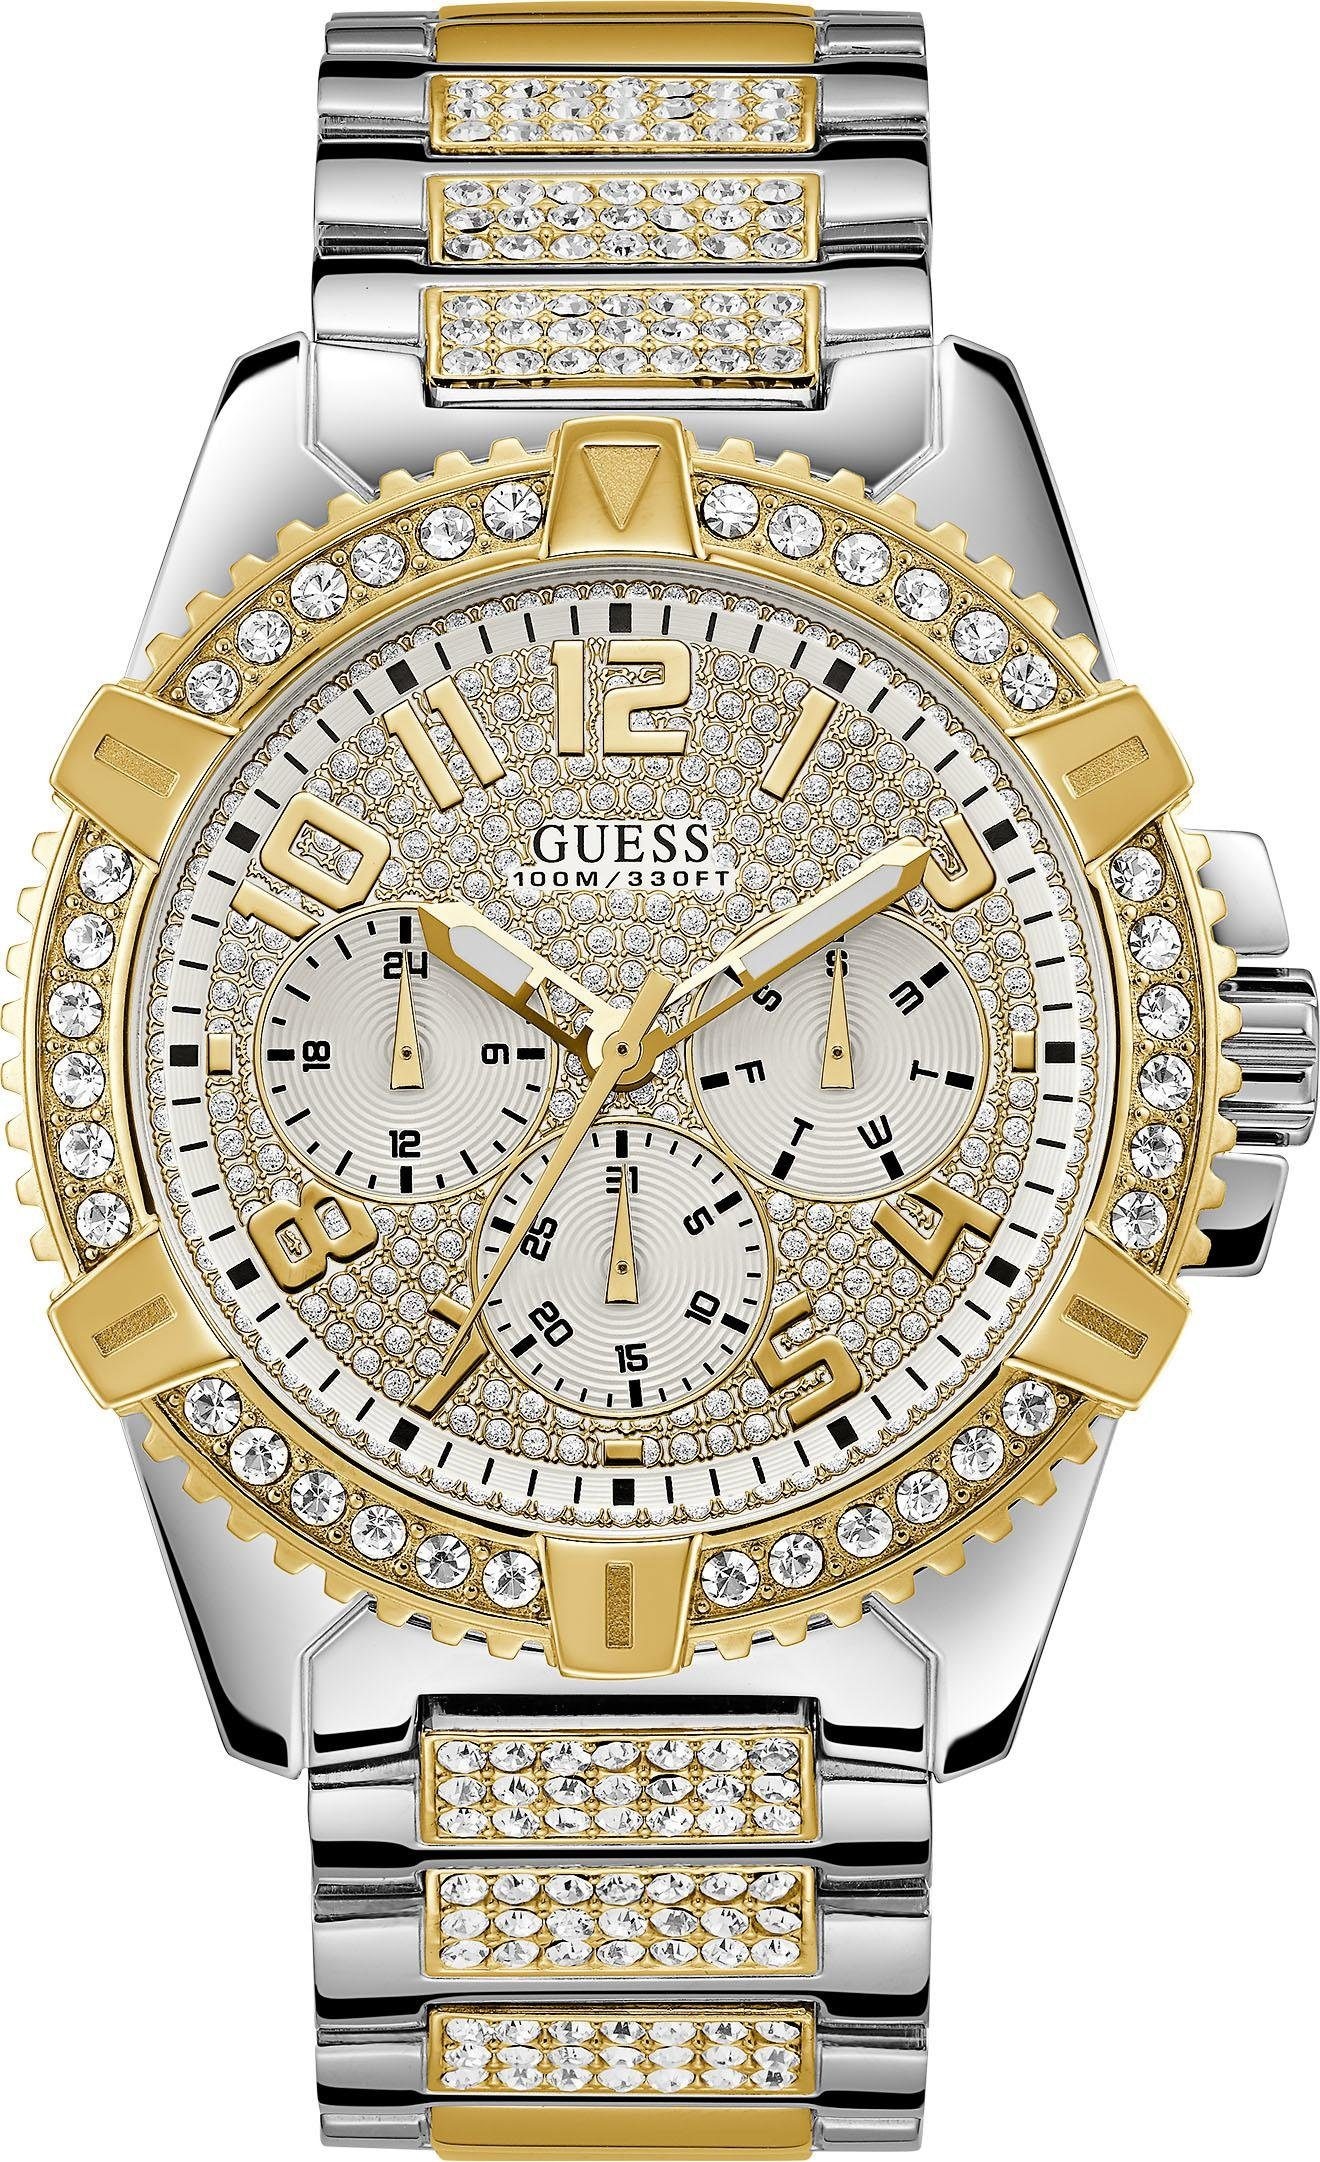 Black Friday »FRONTIER, W0799G4« | Guess BAUR Multifunktionsuhr